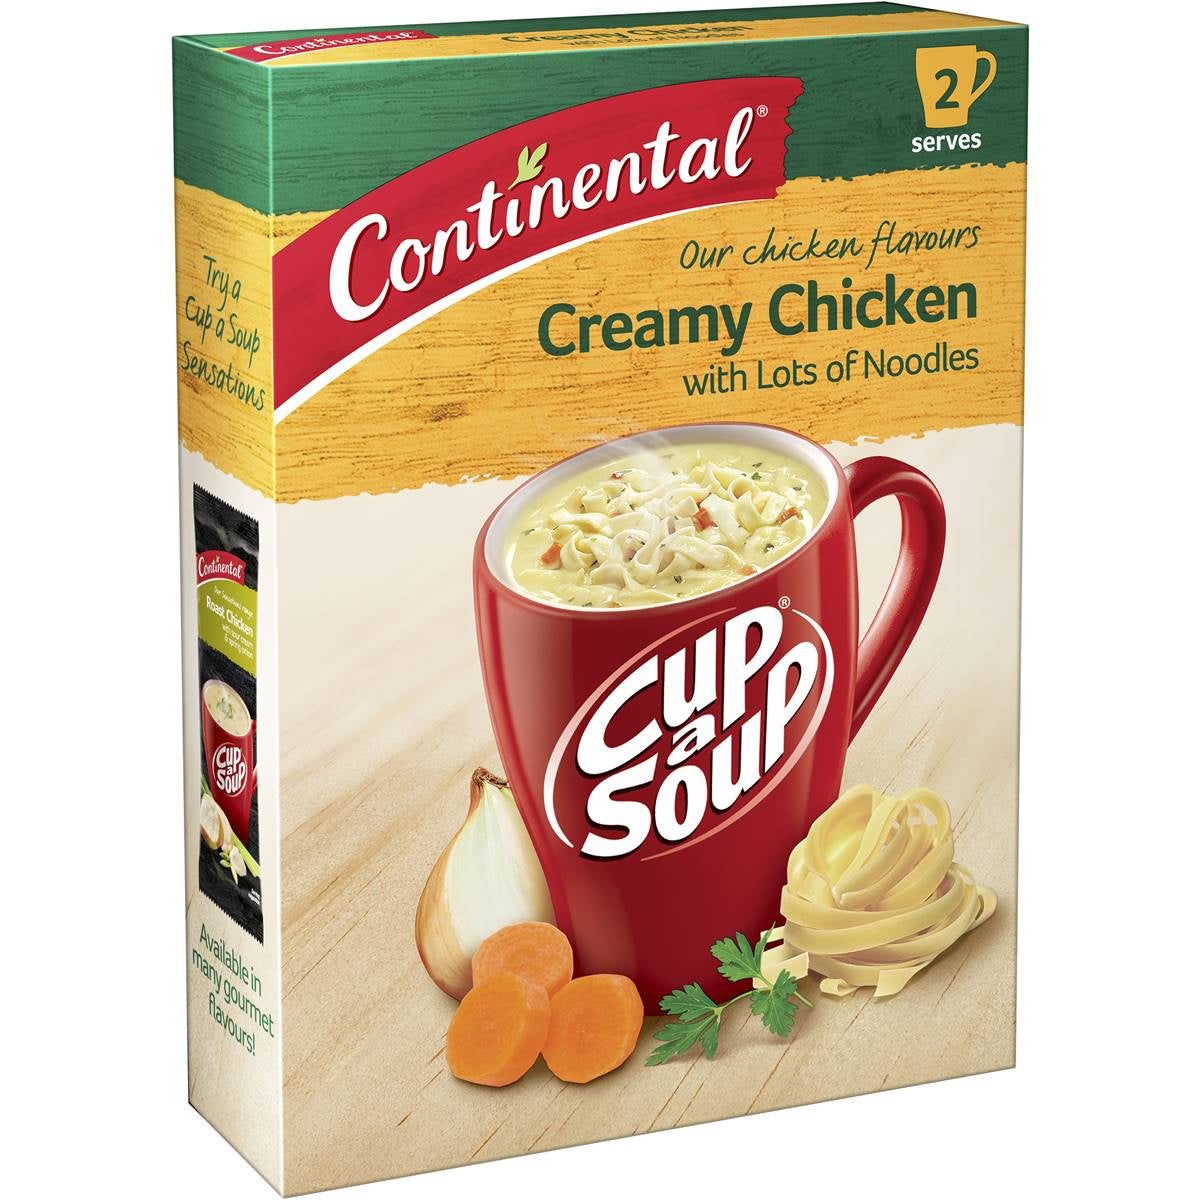 Continental Cup-A-Soup Creamy Chicken Lots-A-Noodles 2pk